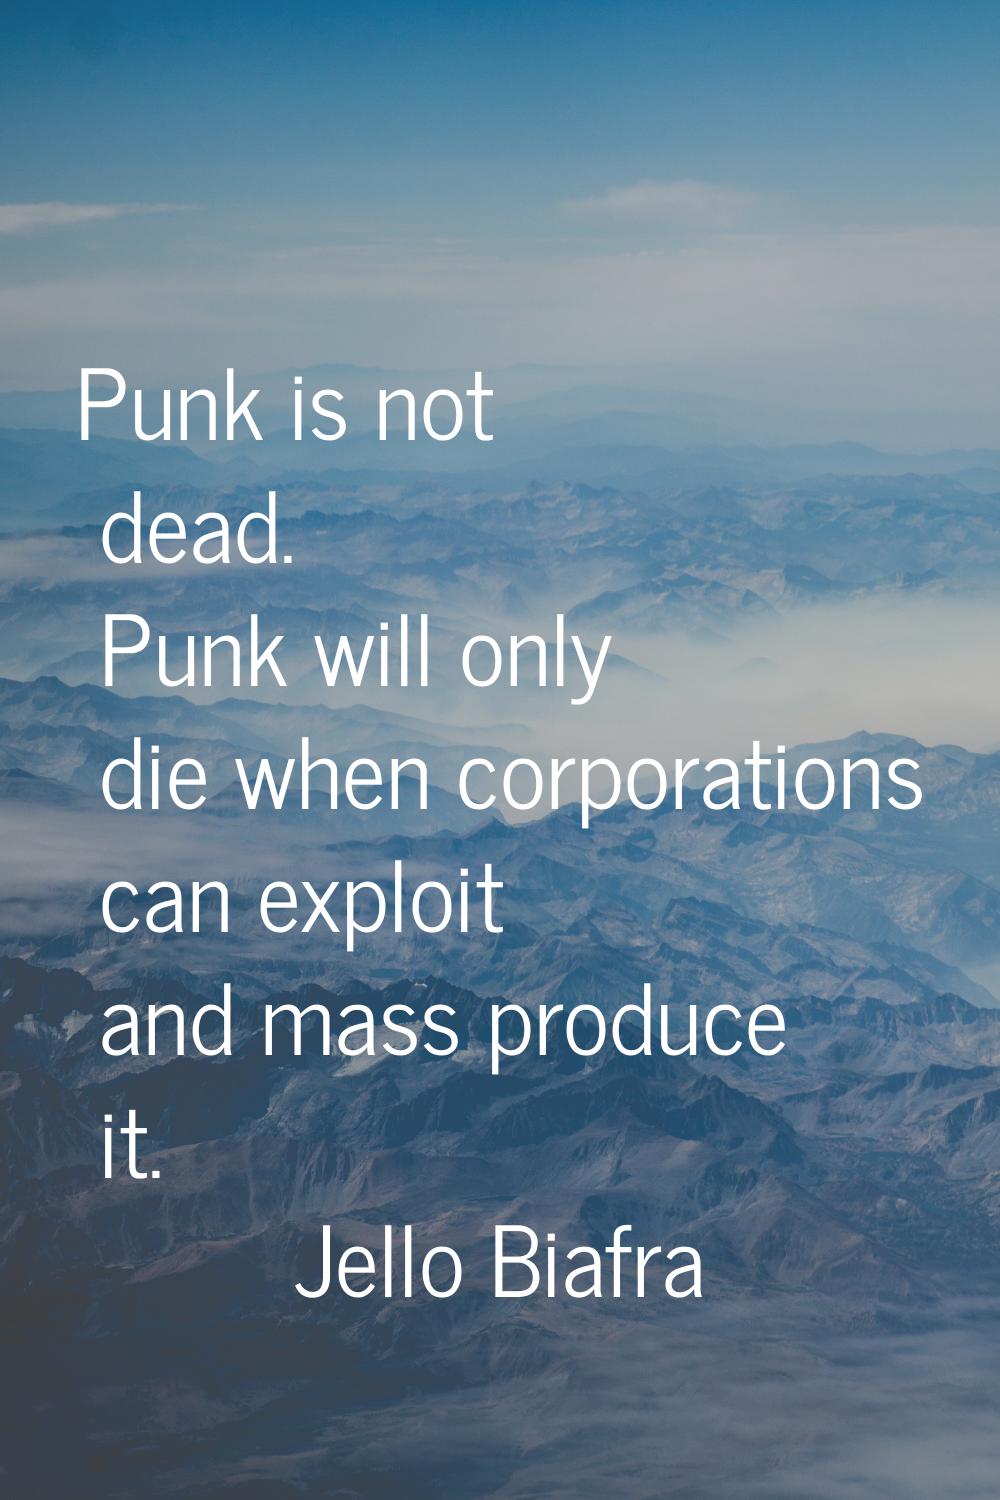 Punk is not dead. Punk will only die when corporations can exploit and mass produce it.